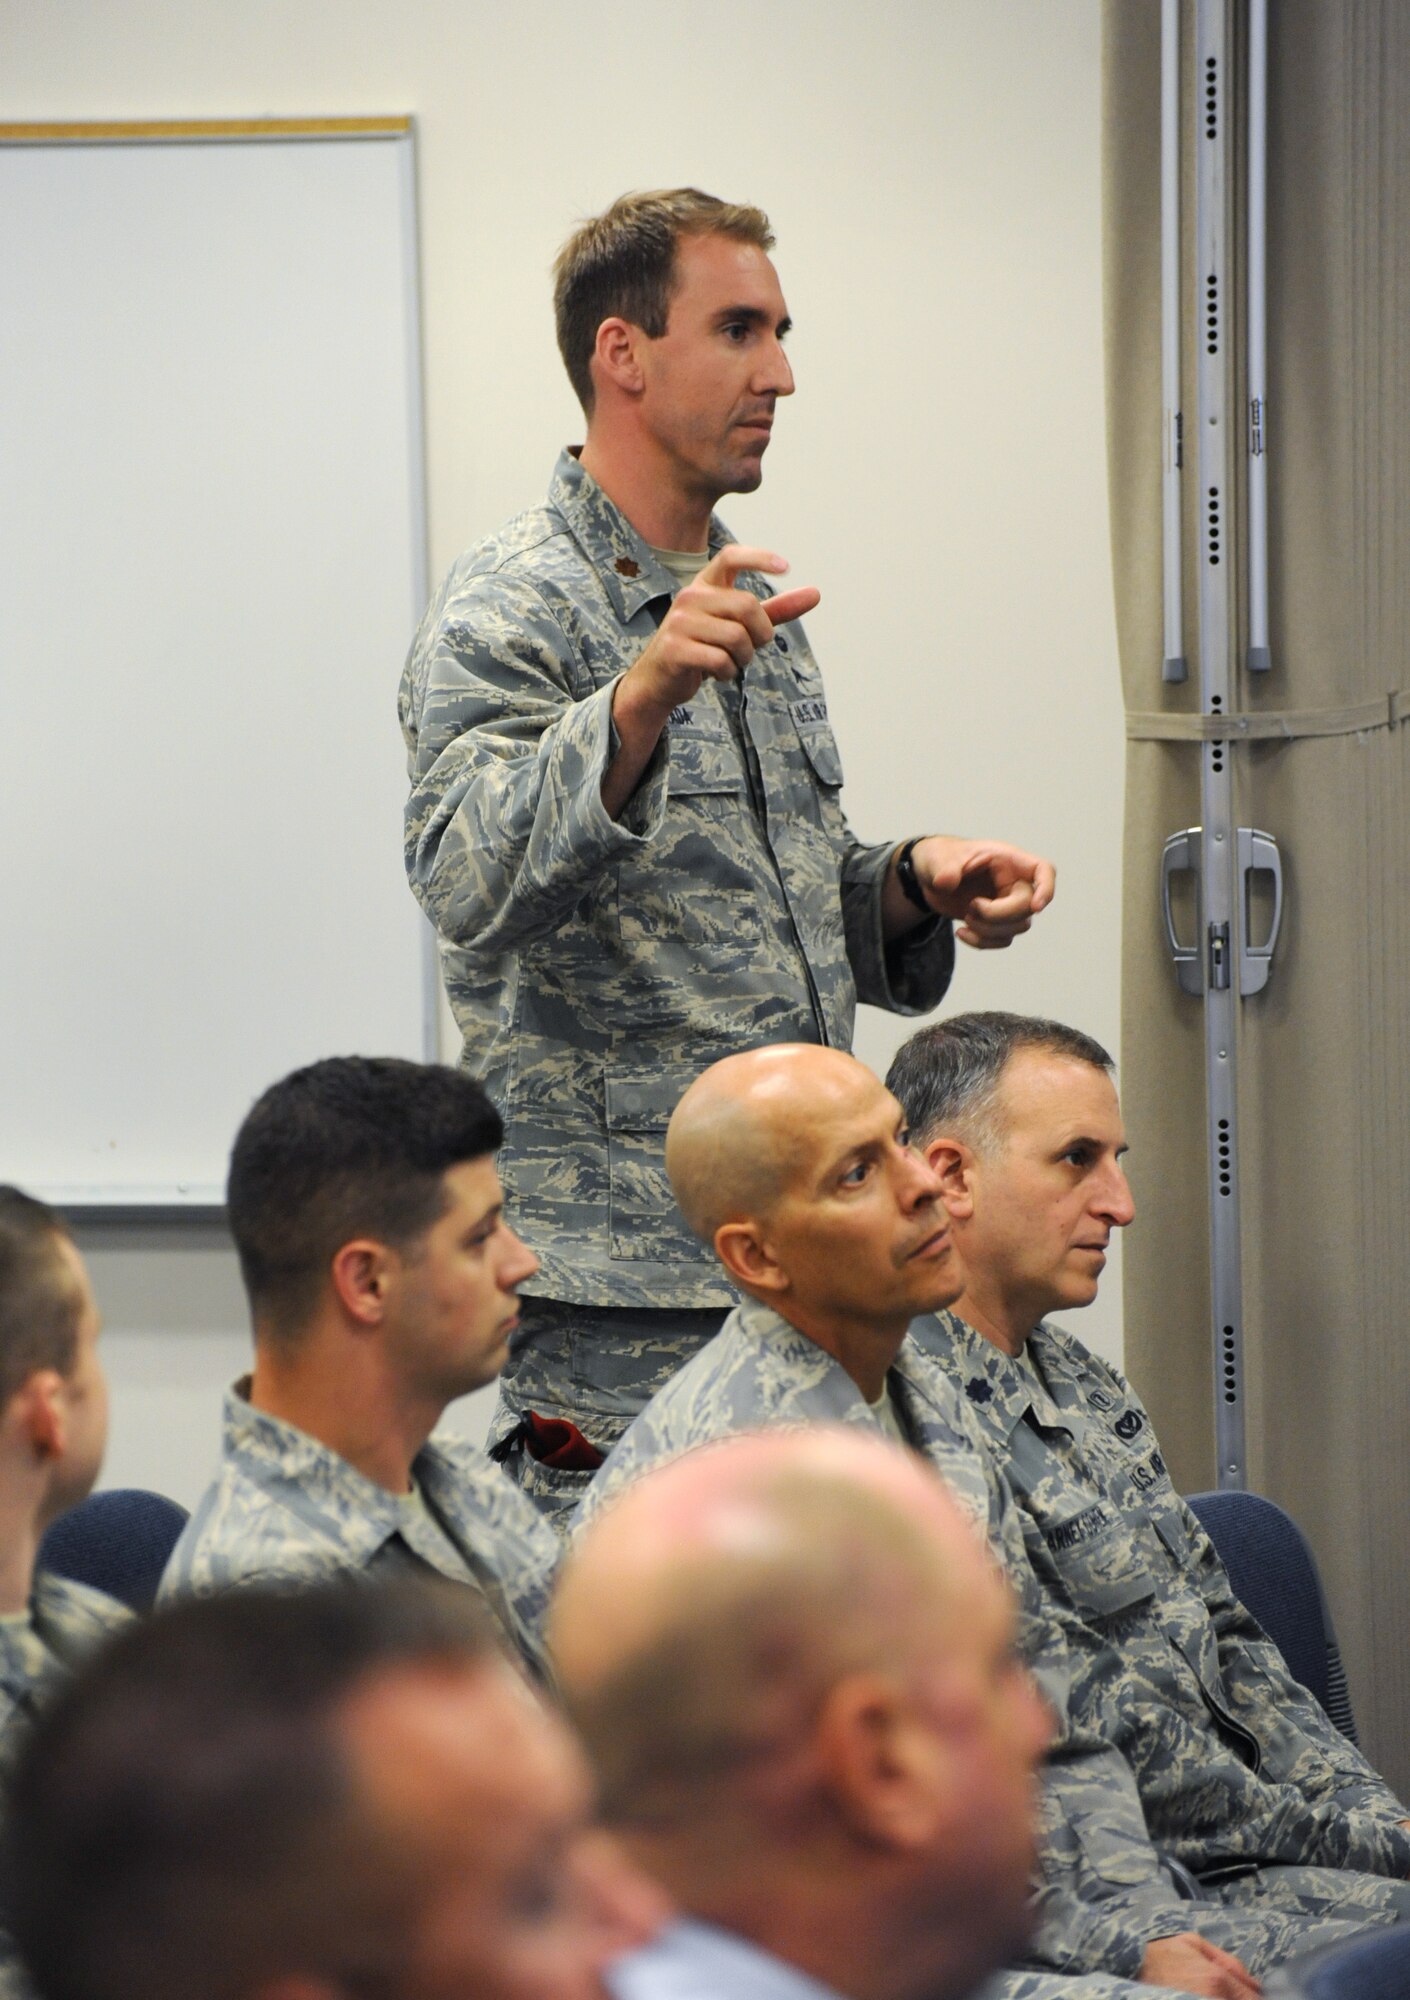 Air Force Maj. Tarek Awada, 125th Special Tactics Squadron commander, asks a question of Army Gen. Frank J. Grass, director of the National Guard, during a town hall event, Aug. 15, 2015, Portland Air National Guard Base, Ore. (U.S. Air National Guard photo by Tech. Sgt. John Hughel, 142nd Fighter Wing Public Affairs/Released)